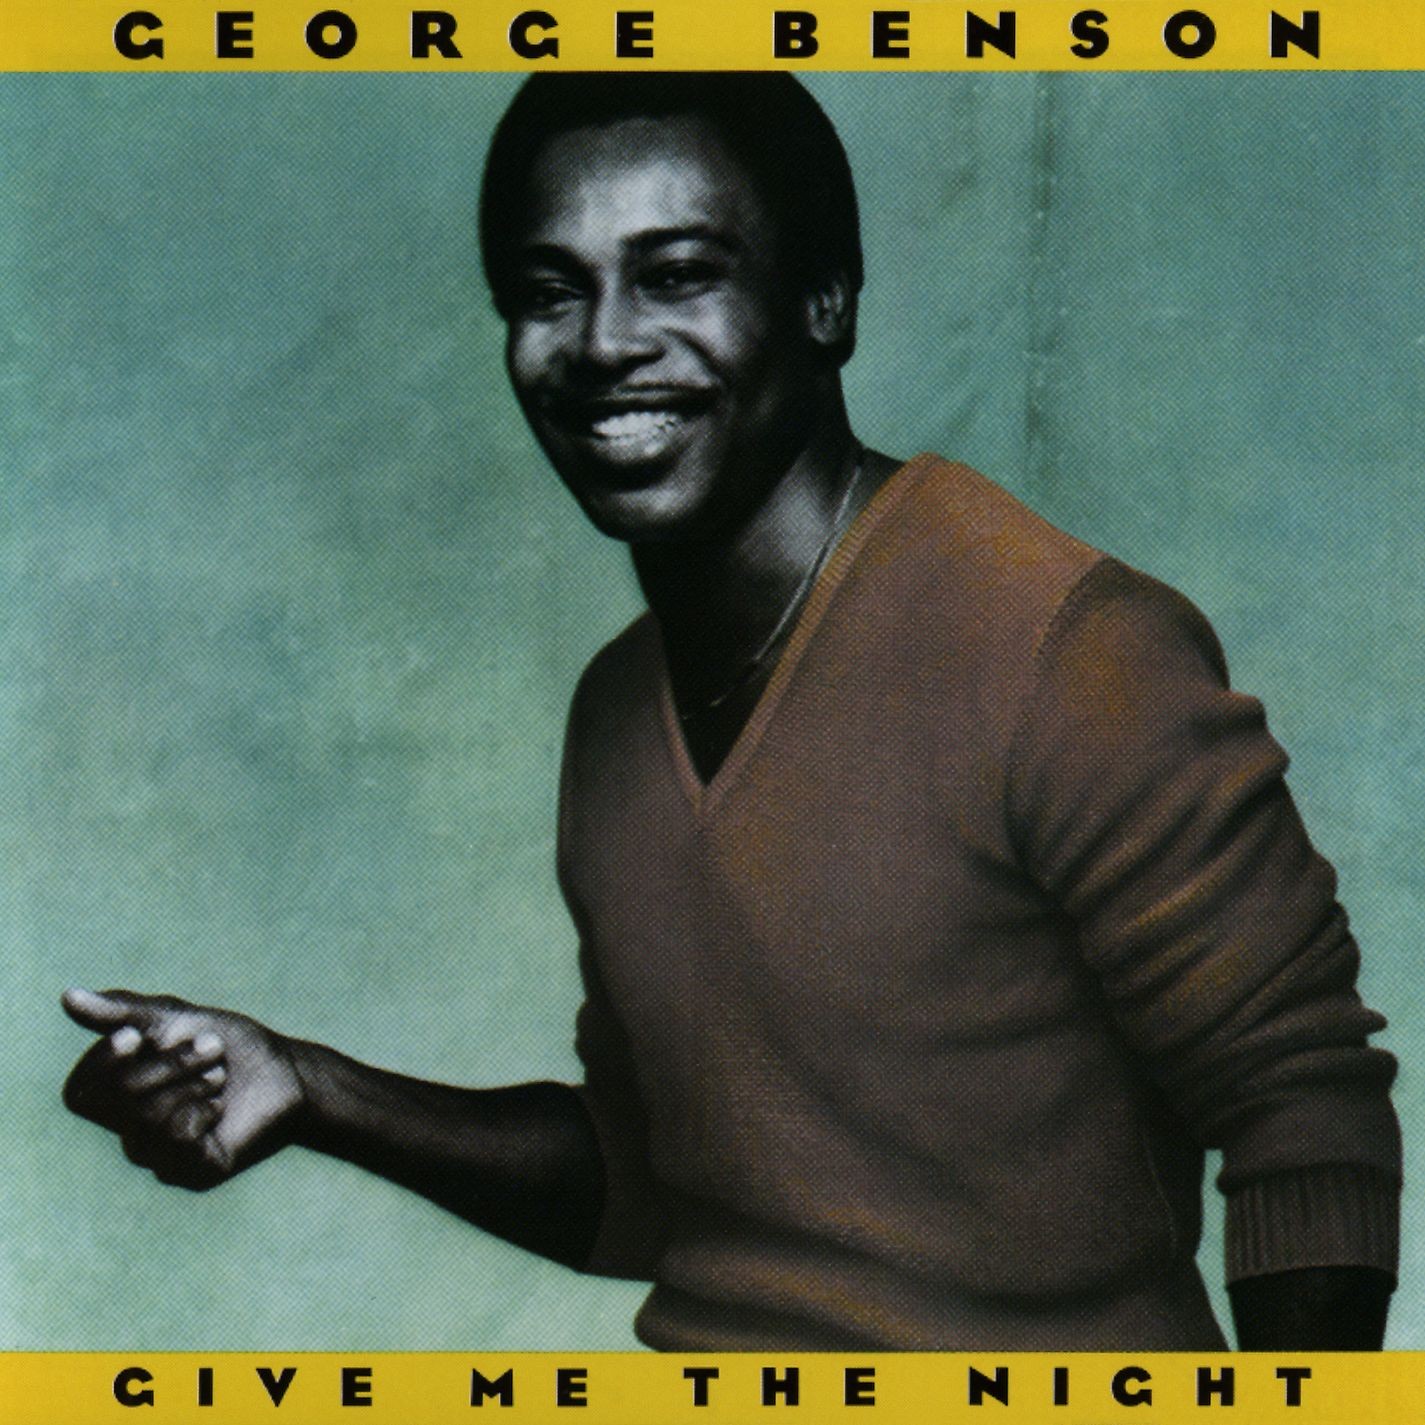 %255BAllCDCovers%255D_george_benson_give_me_the_night_1984_retail_cd-front.jpg